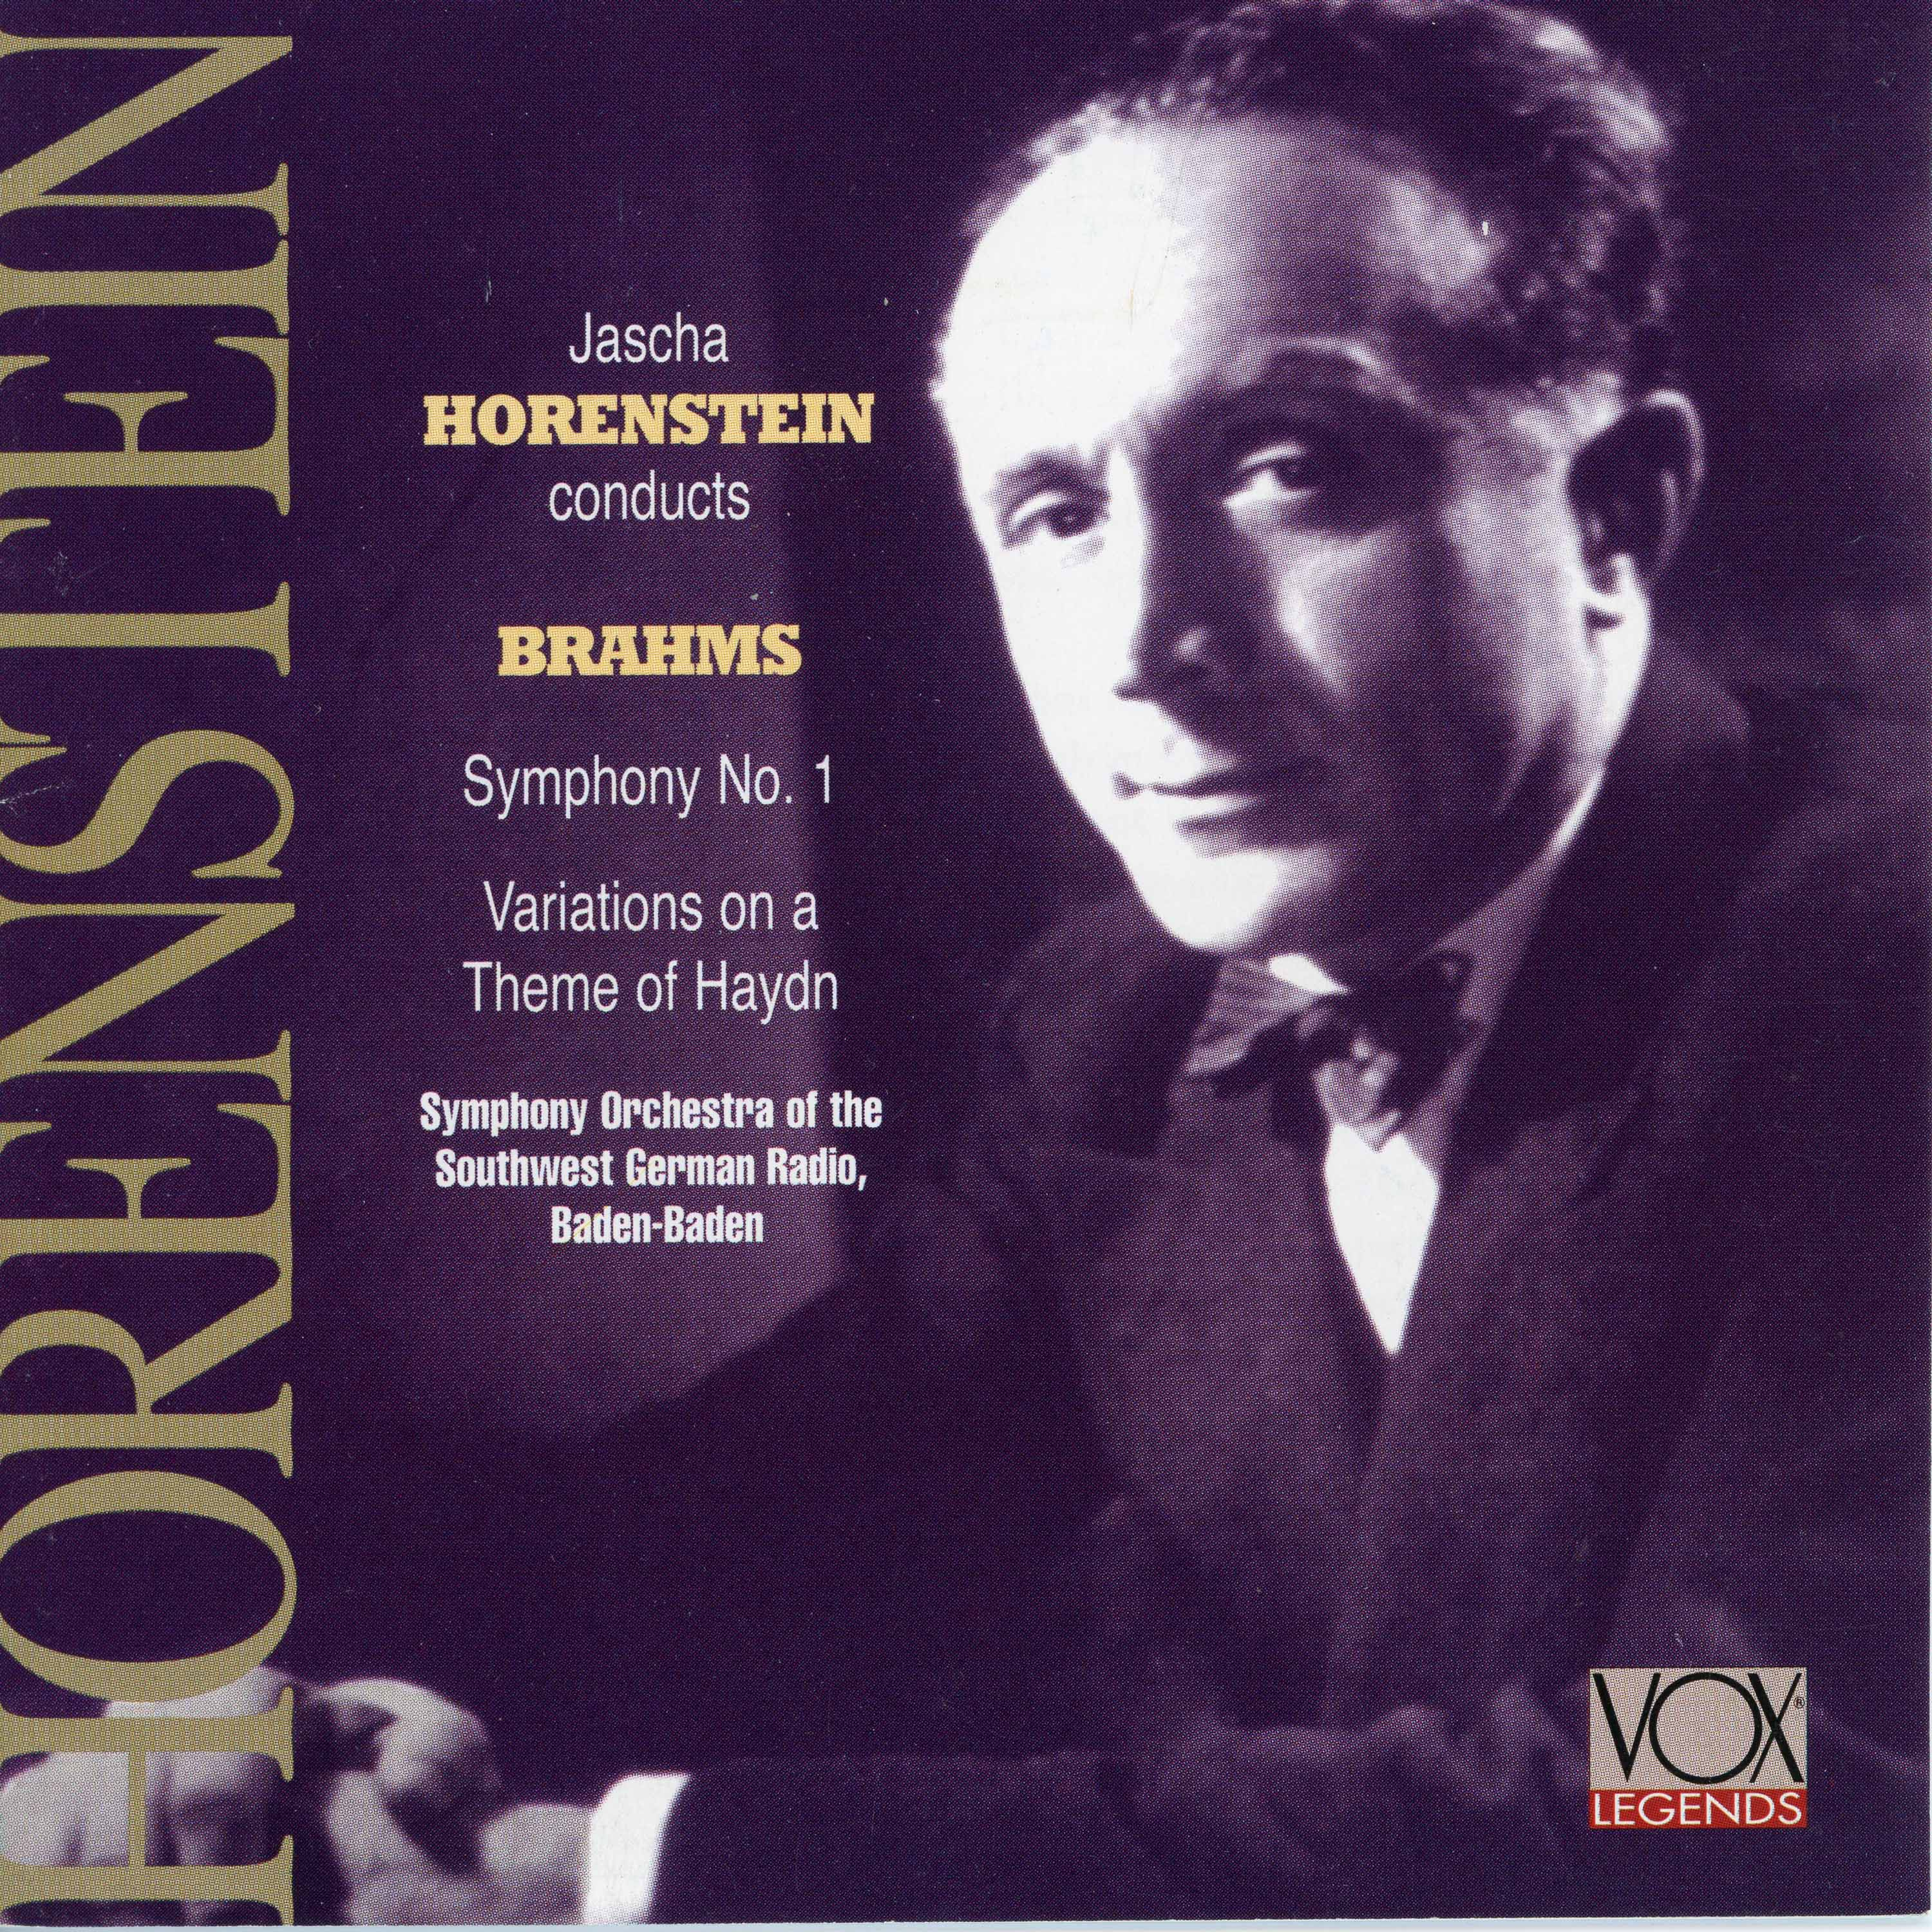 Variations on a Theme by Haydn, Op. 56a "St. Anthony Variations":Variations on a Theme by Haydn, Op. 56a "St. Anthony Variations": Finale. Andante